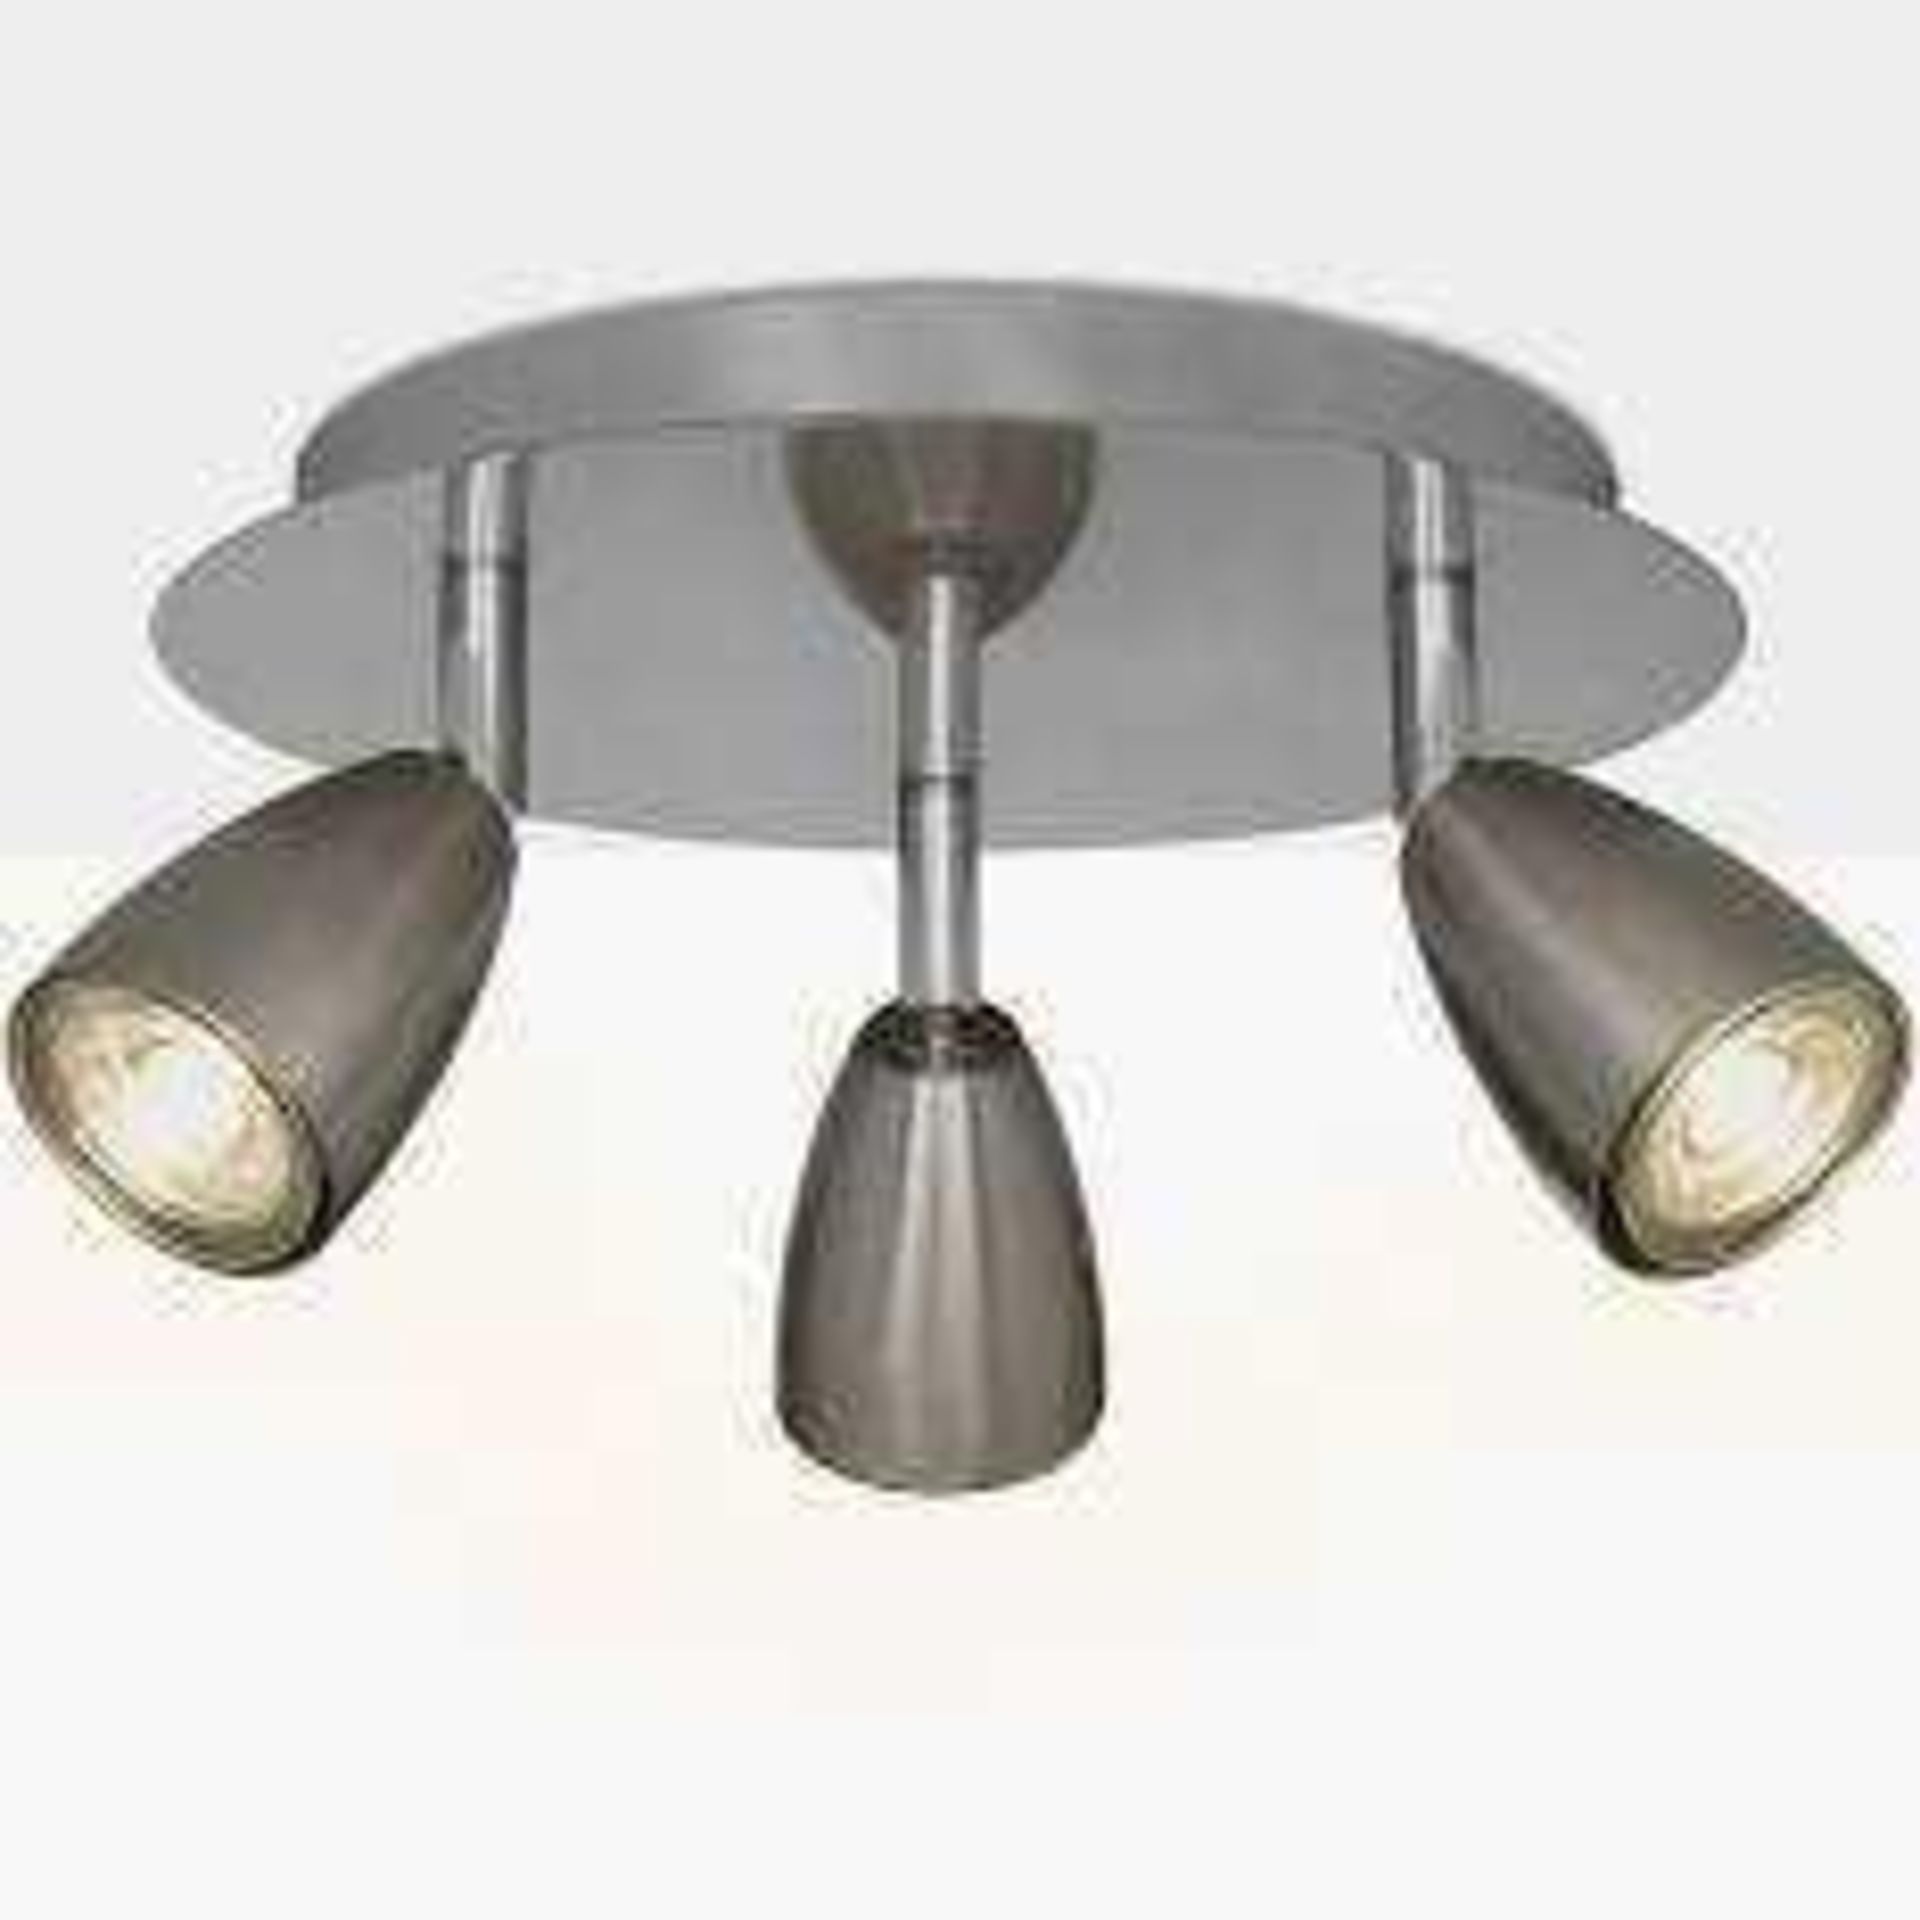 Combined RRP £150 Lot To Contain Assortd John Lewis Lights To Include Thea 3 Light Spotlight Plate,L